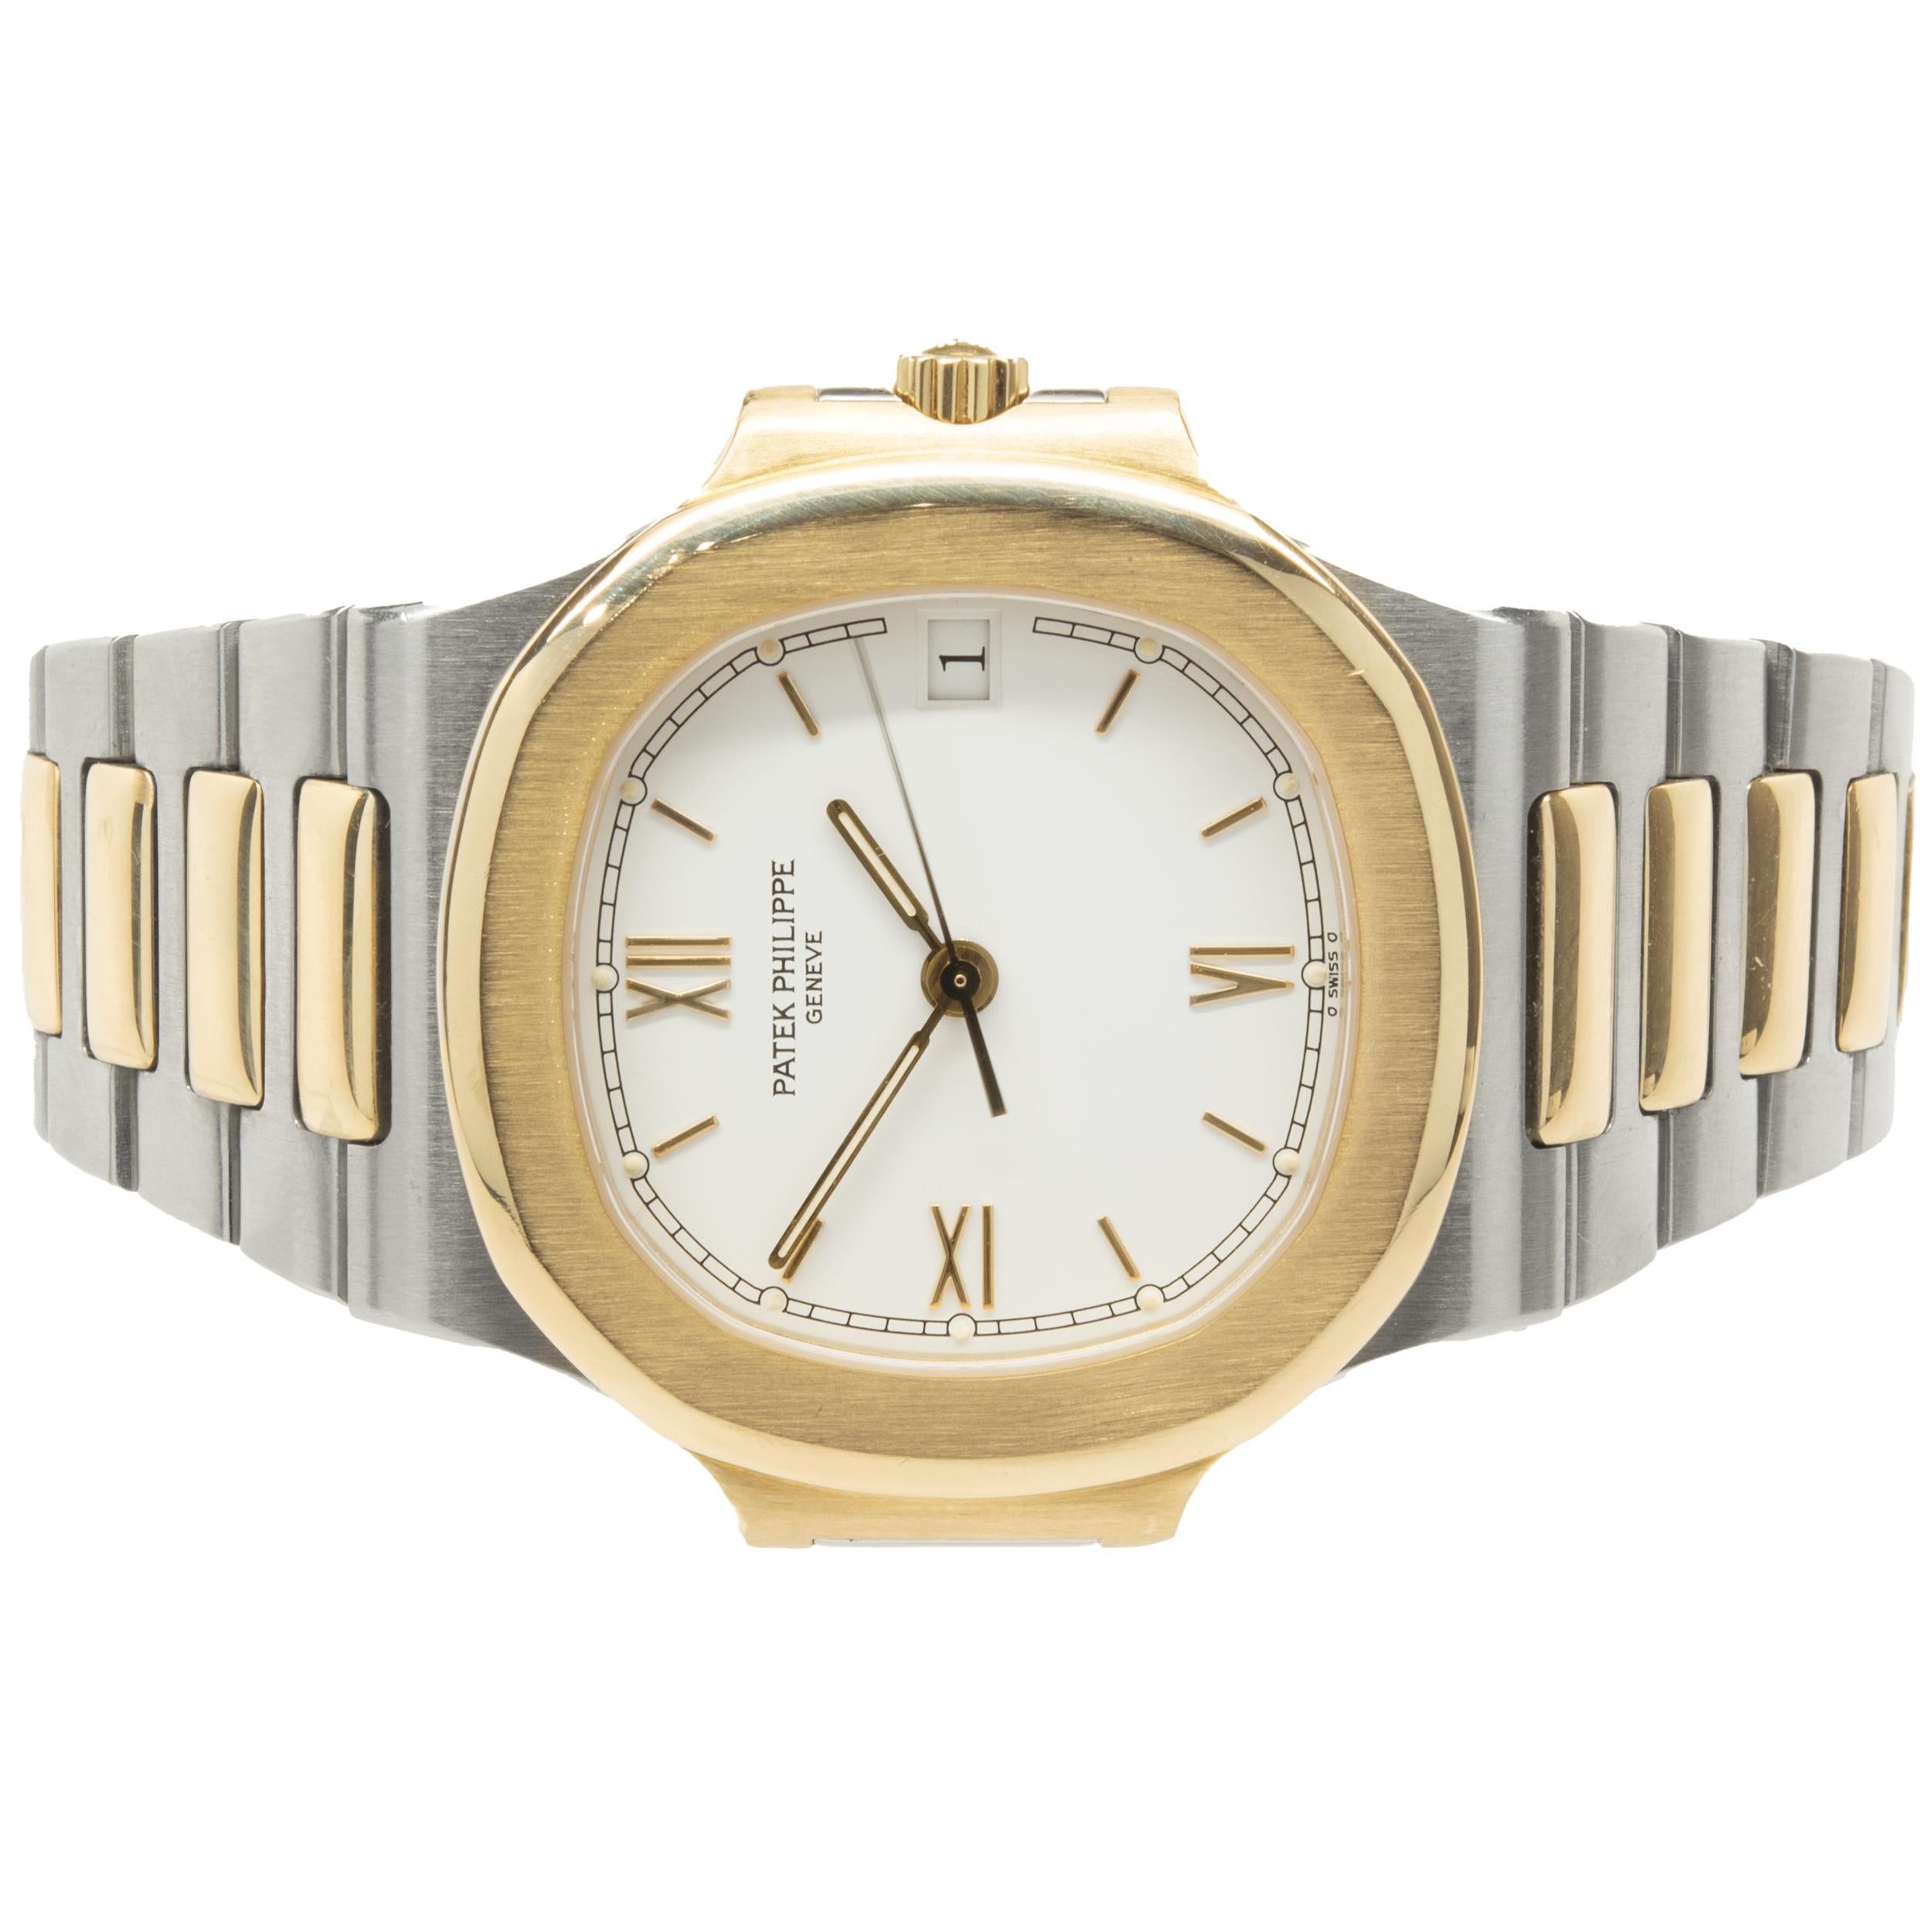 Movement: automatic
Function: hours, minutes, seconds, date
Case: 37.5mm stainless steel round case, 18K yellow gold smooth bezel, sapphire crystal, push pull crown
Band: Patek Philippe stainless steel & 18K yellow gold bracelet, integrated